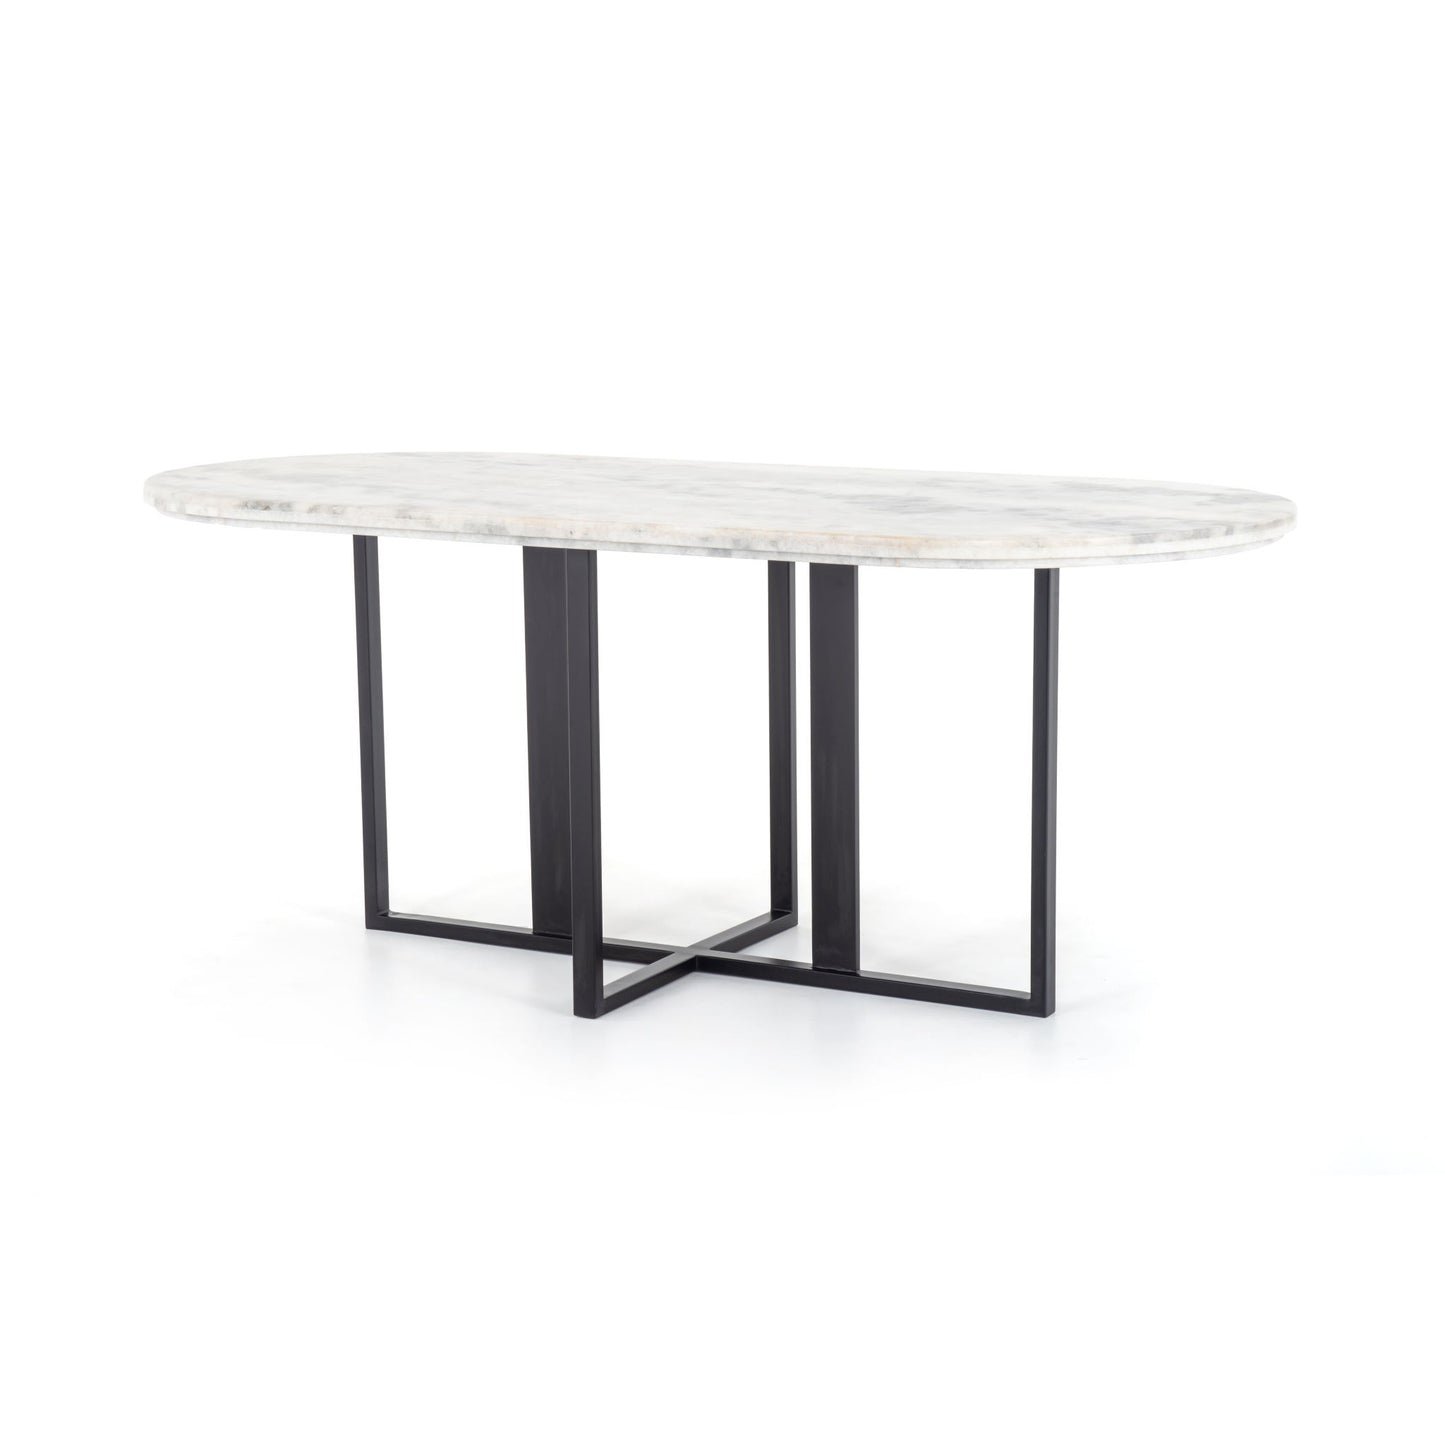 Load image into Gallery viewer, Devan Oval Dining Table BlackDining Table Four Hands  Black   Four Hands, Mid Century Modern Furniture, Old Bones Furniture Company, Old Bones Co, Modern Mid Century, Designer Furniture, https://www.oldbonesco.com/
